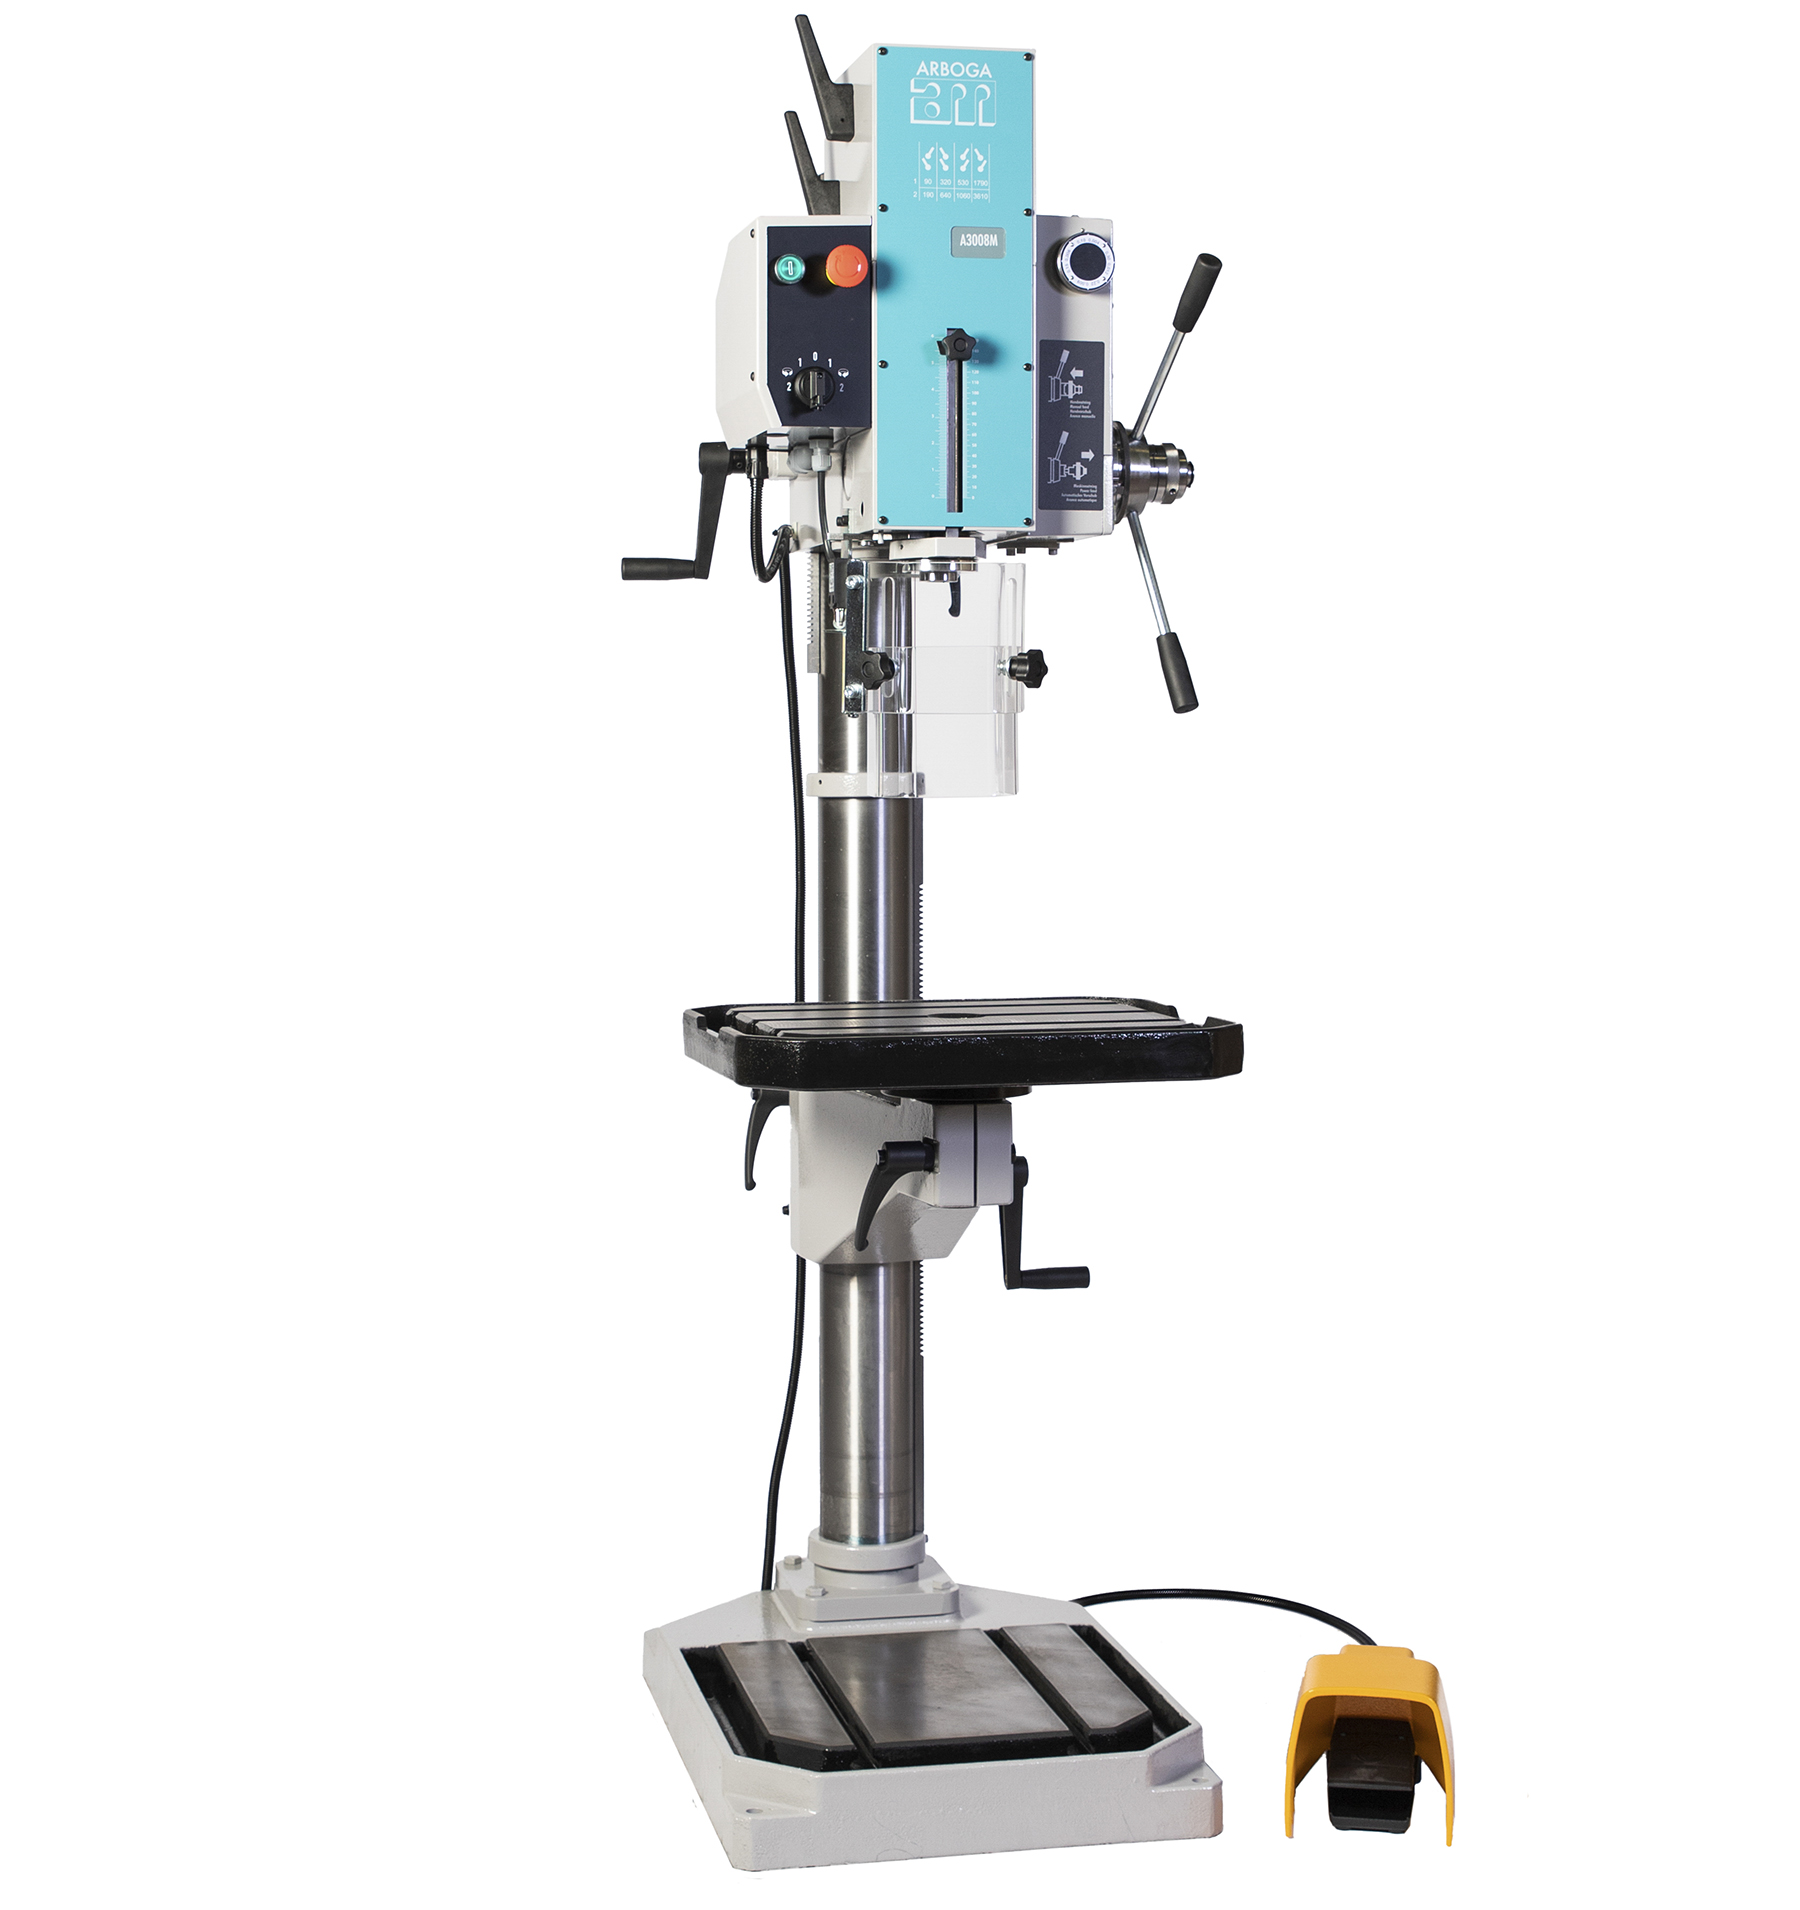 The 25" Power Feed Gear Head Drill Press is displayed.